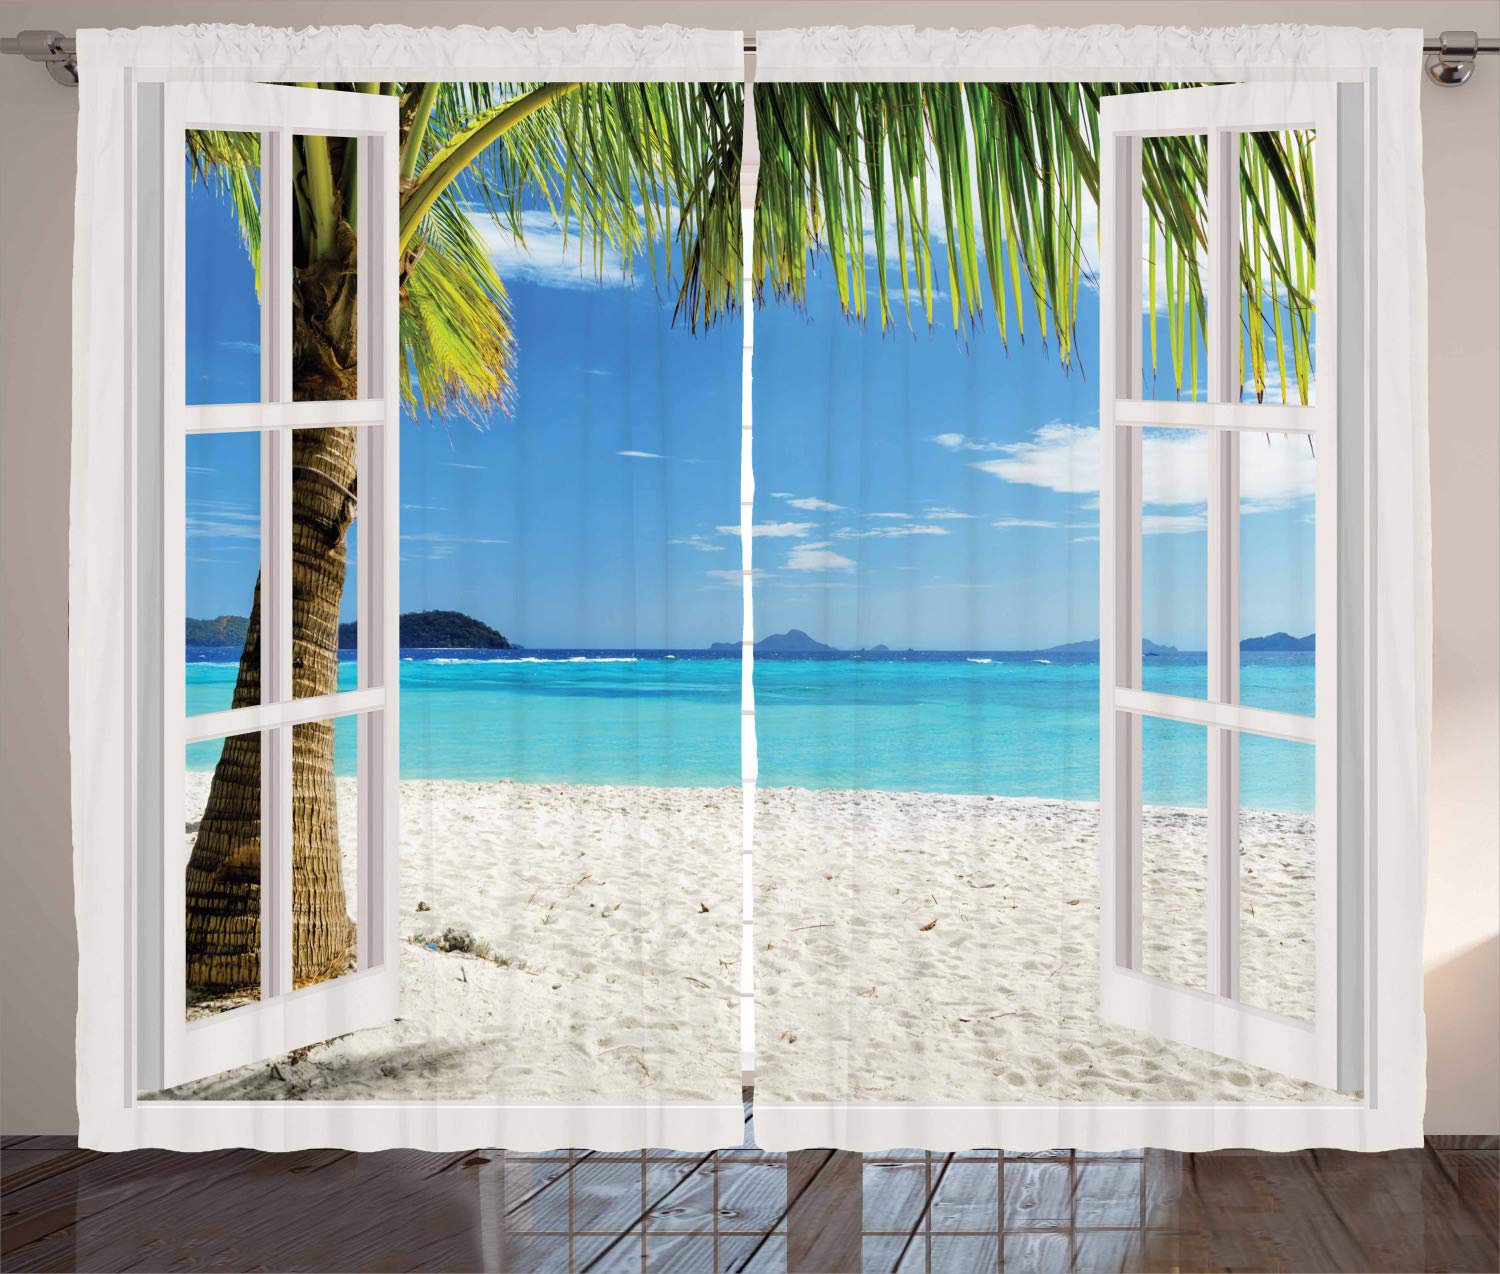 Ambesonne Turquoise Curtains, Tropical Palm Trees on Island Ocean Beach Through White Wooden Windows, Living Room Bedroom Window Drapes 2 Panel Set...